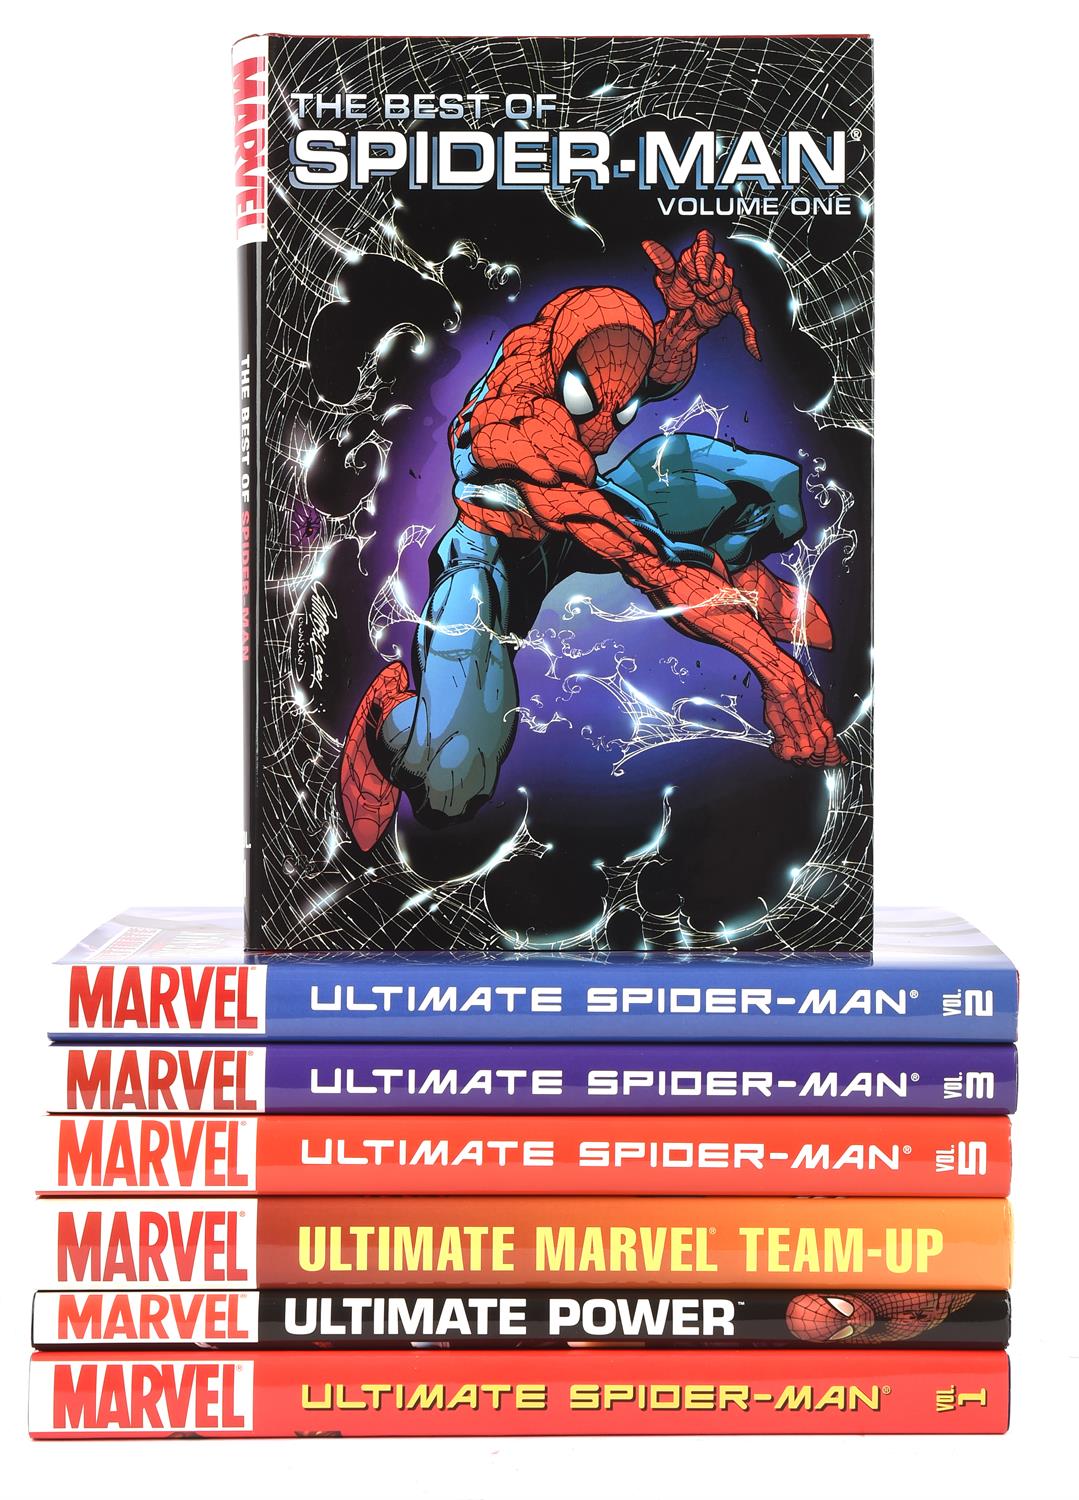 Marvel Amazing Spider-Man & Captain America Hardcover Graphic Novels: A collection of X14 Marvel